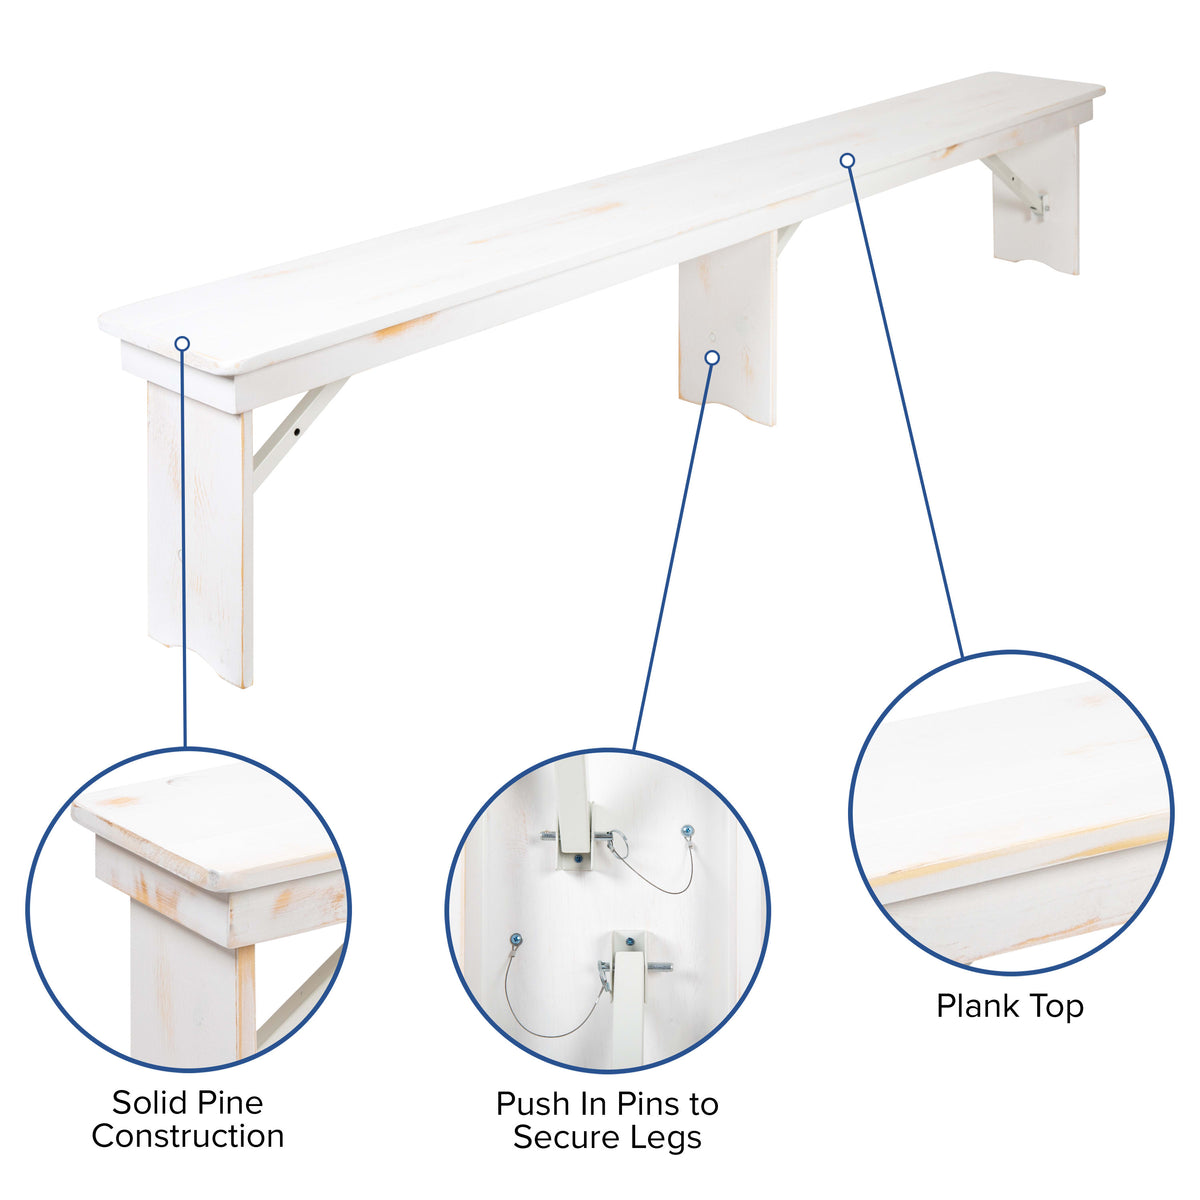 Antique Rustic White |#| 3 Piece Set-9' x 40inch Antique Rustic White Folding Farm Table and Two Bench Set